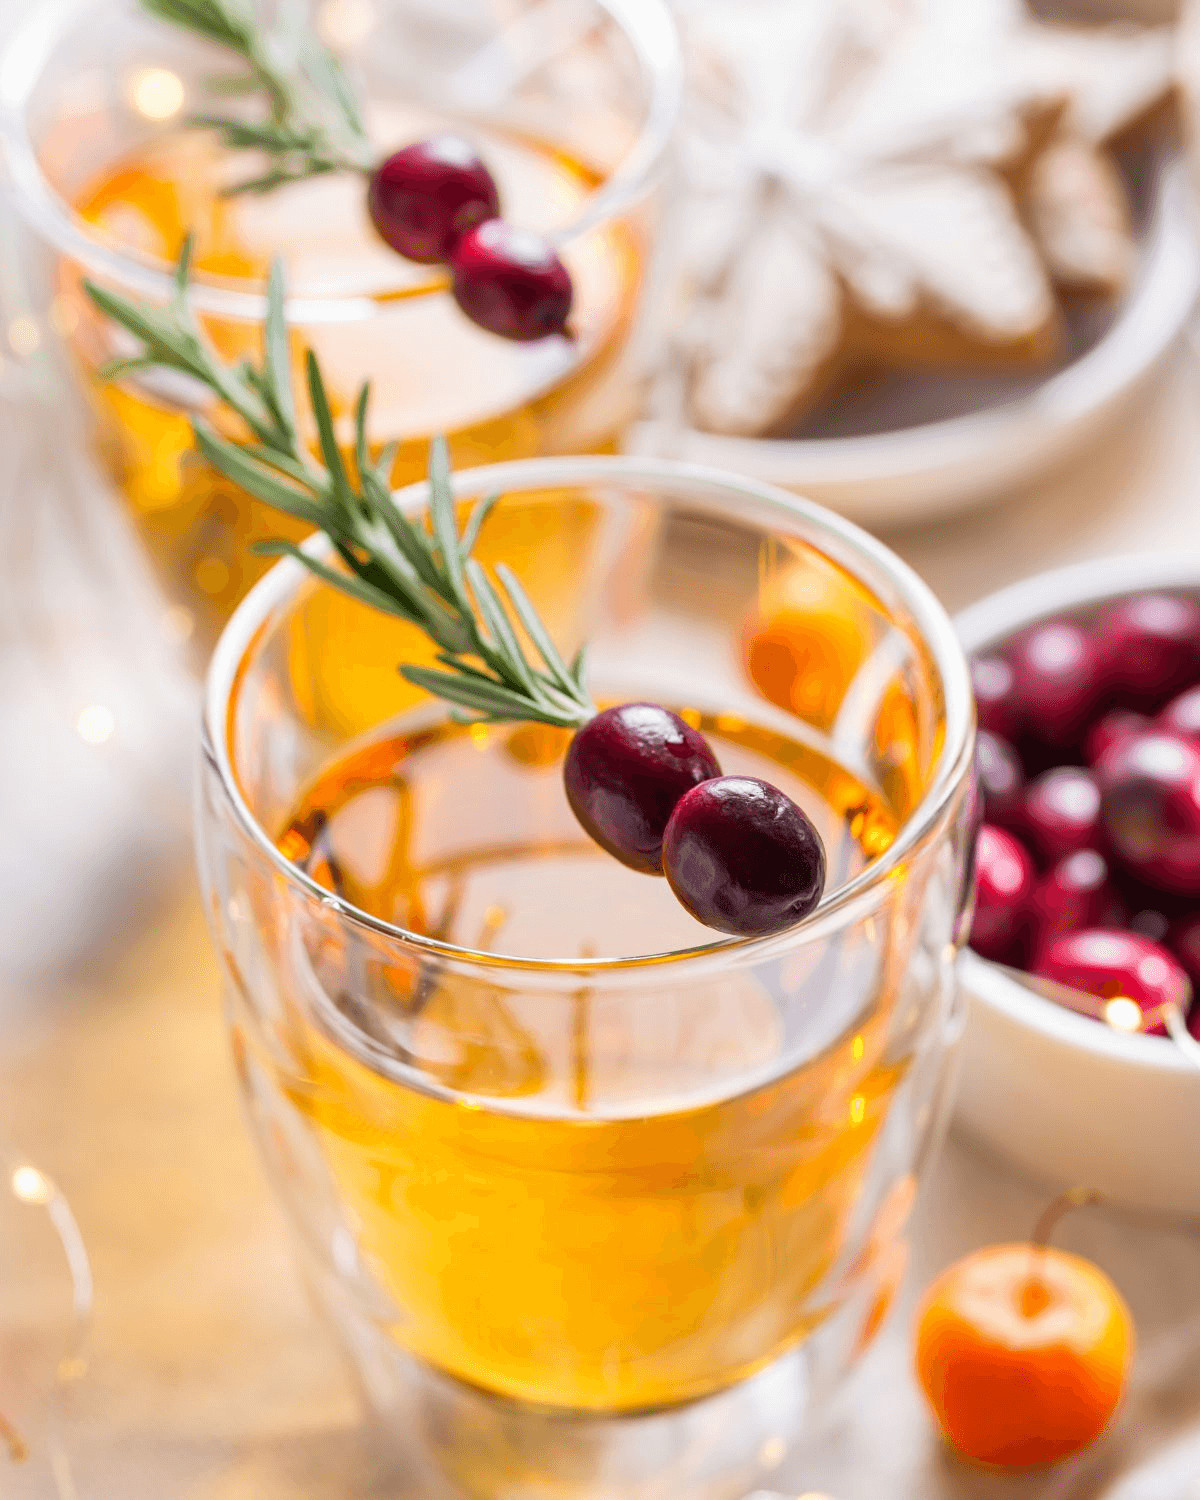 A glass of apple boilo with berries and a spring of rosemary.